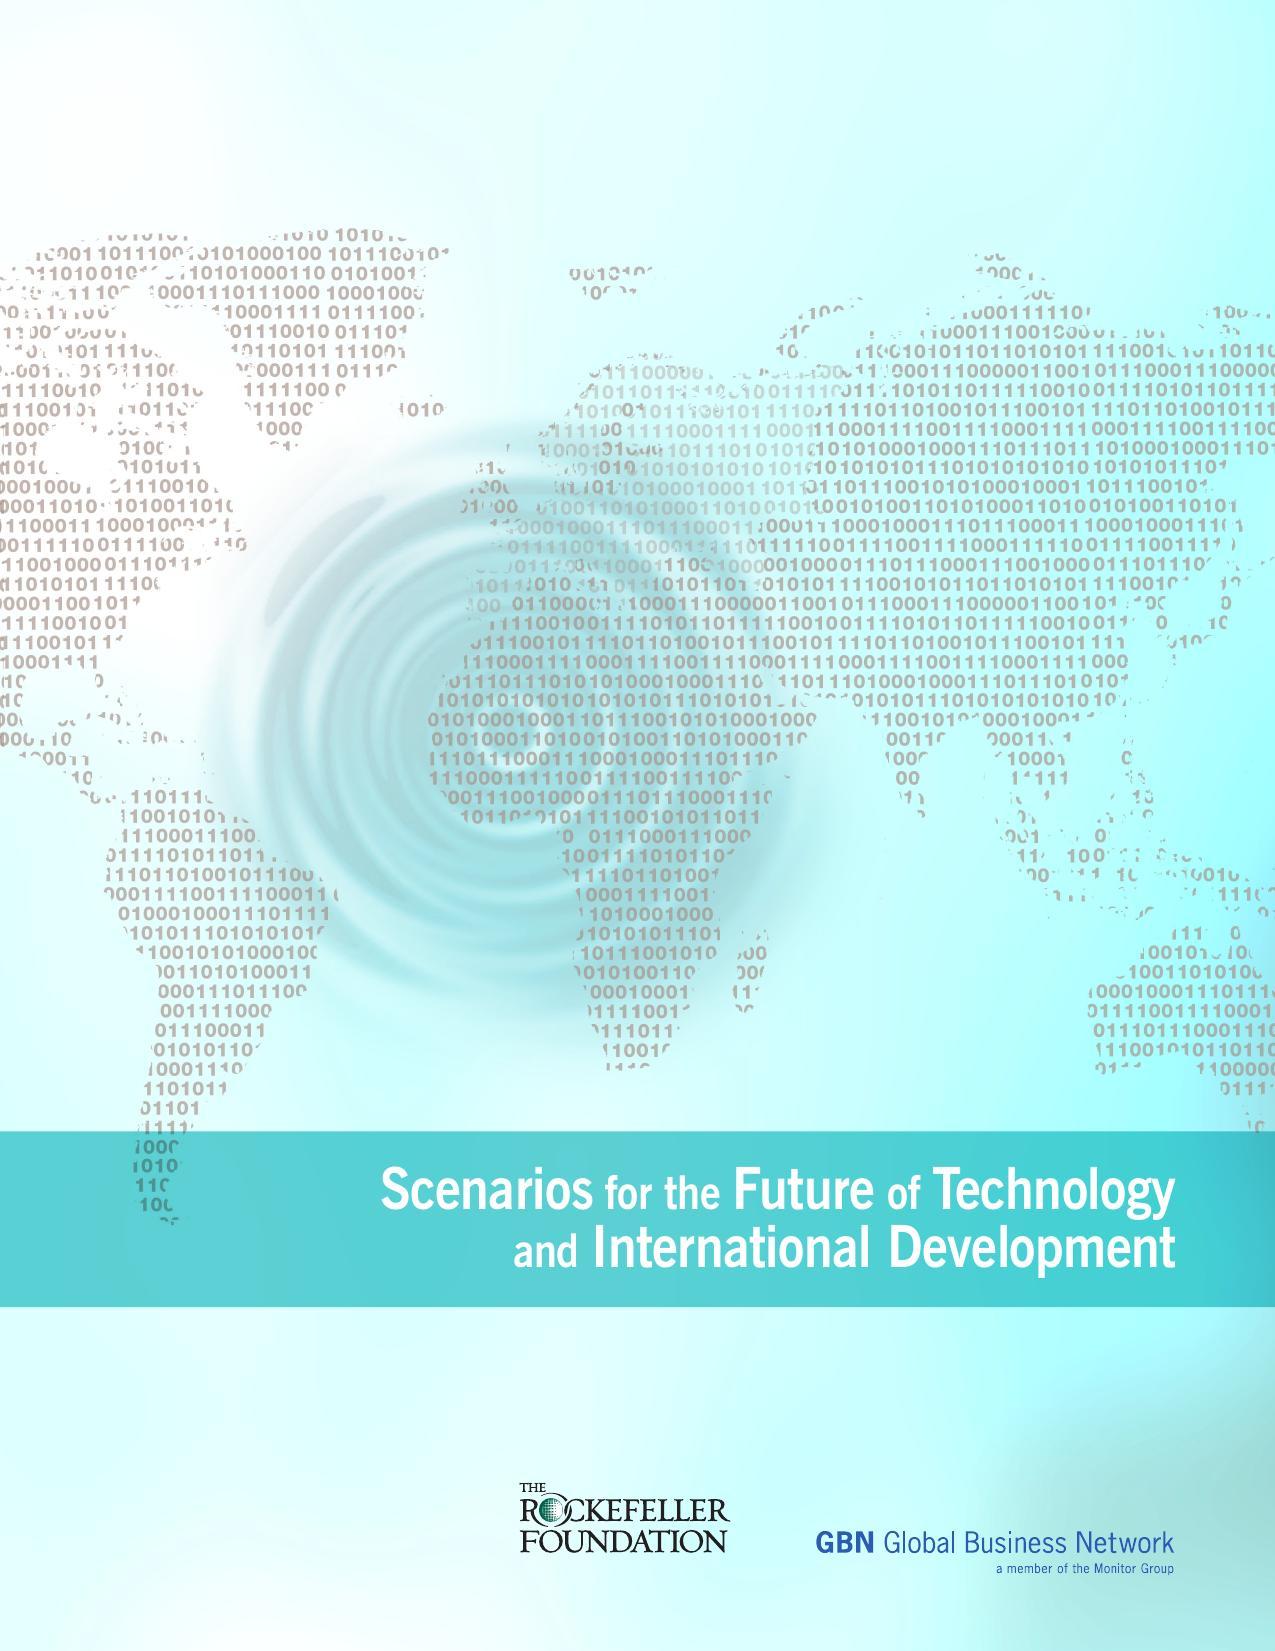 Scenarios for the Future of Technology and International Development (2010) by Rockefeller Foundation